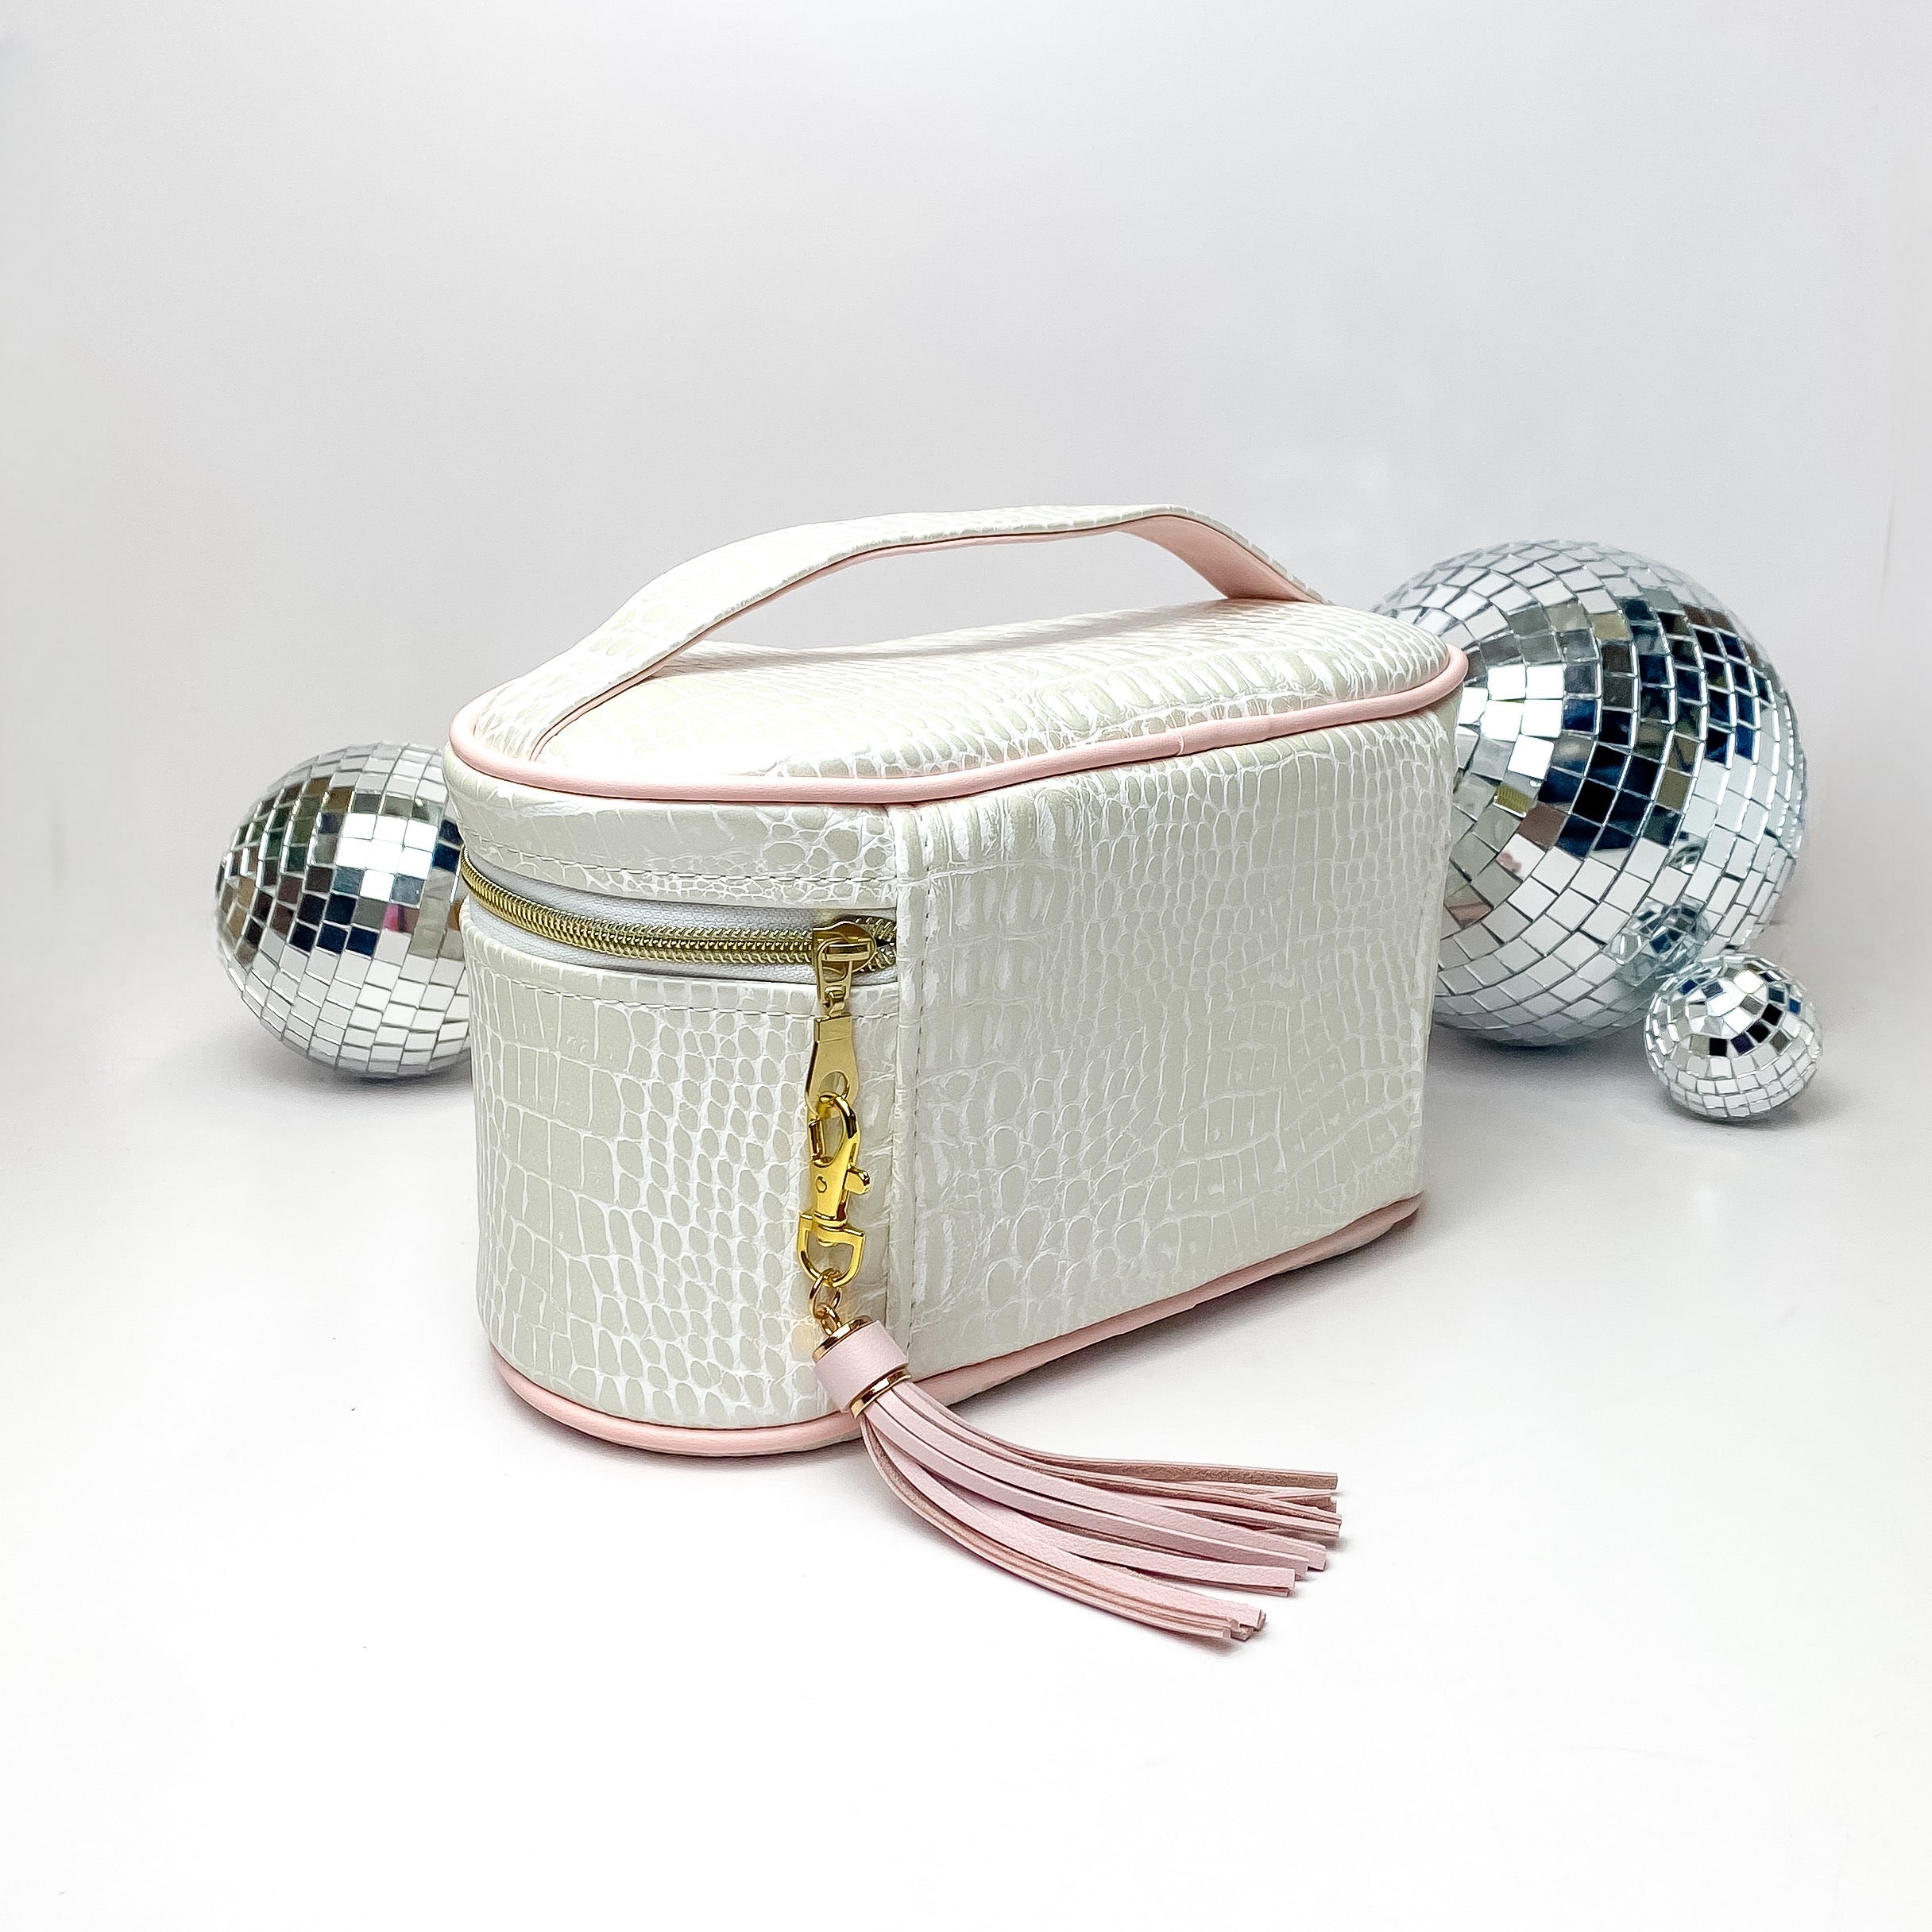 Makeup Junkie | Small Shade of Pearl Train Case in Pearl White Croc Print - Giddy Up Glamour Boutique